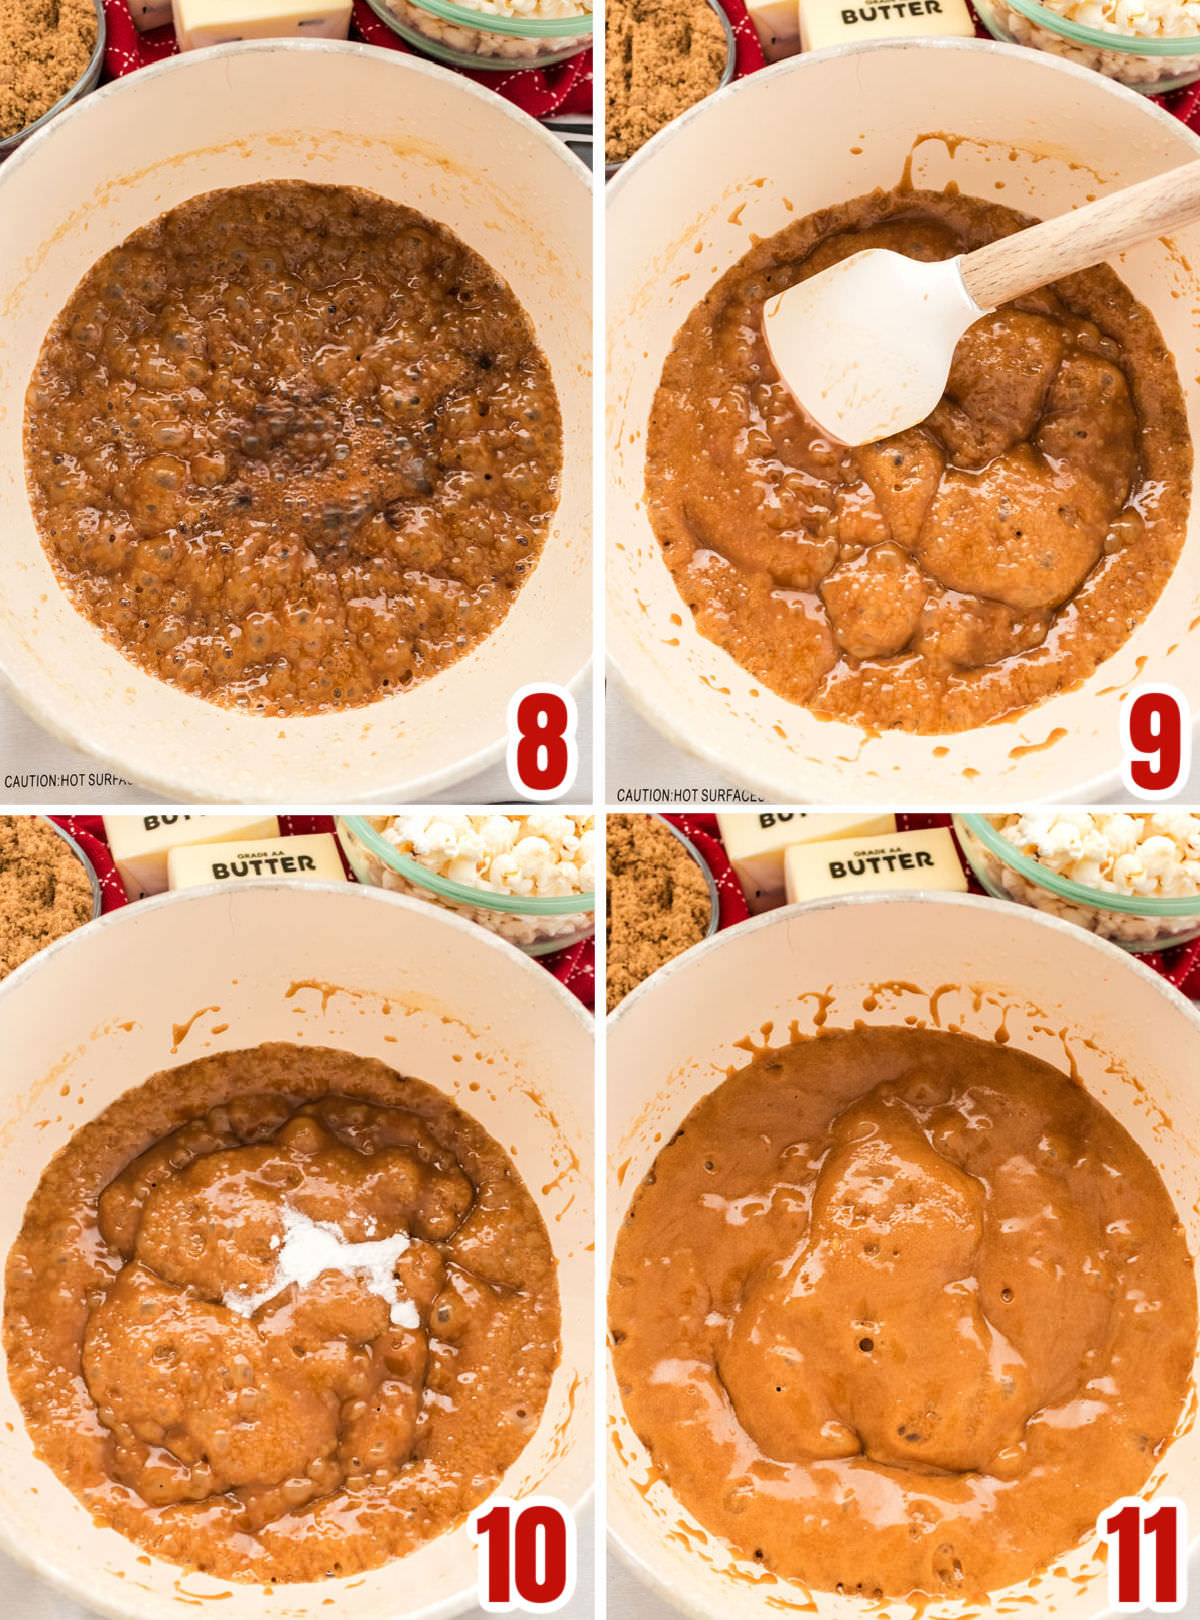 Collage image showing the steps for cooking the caramel mixture.